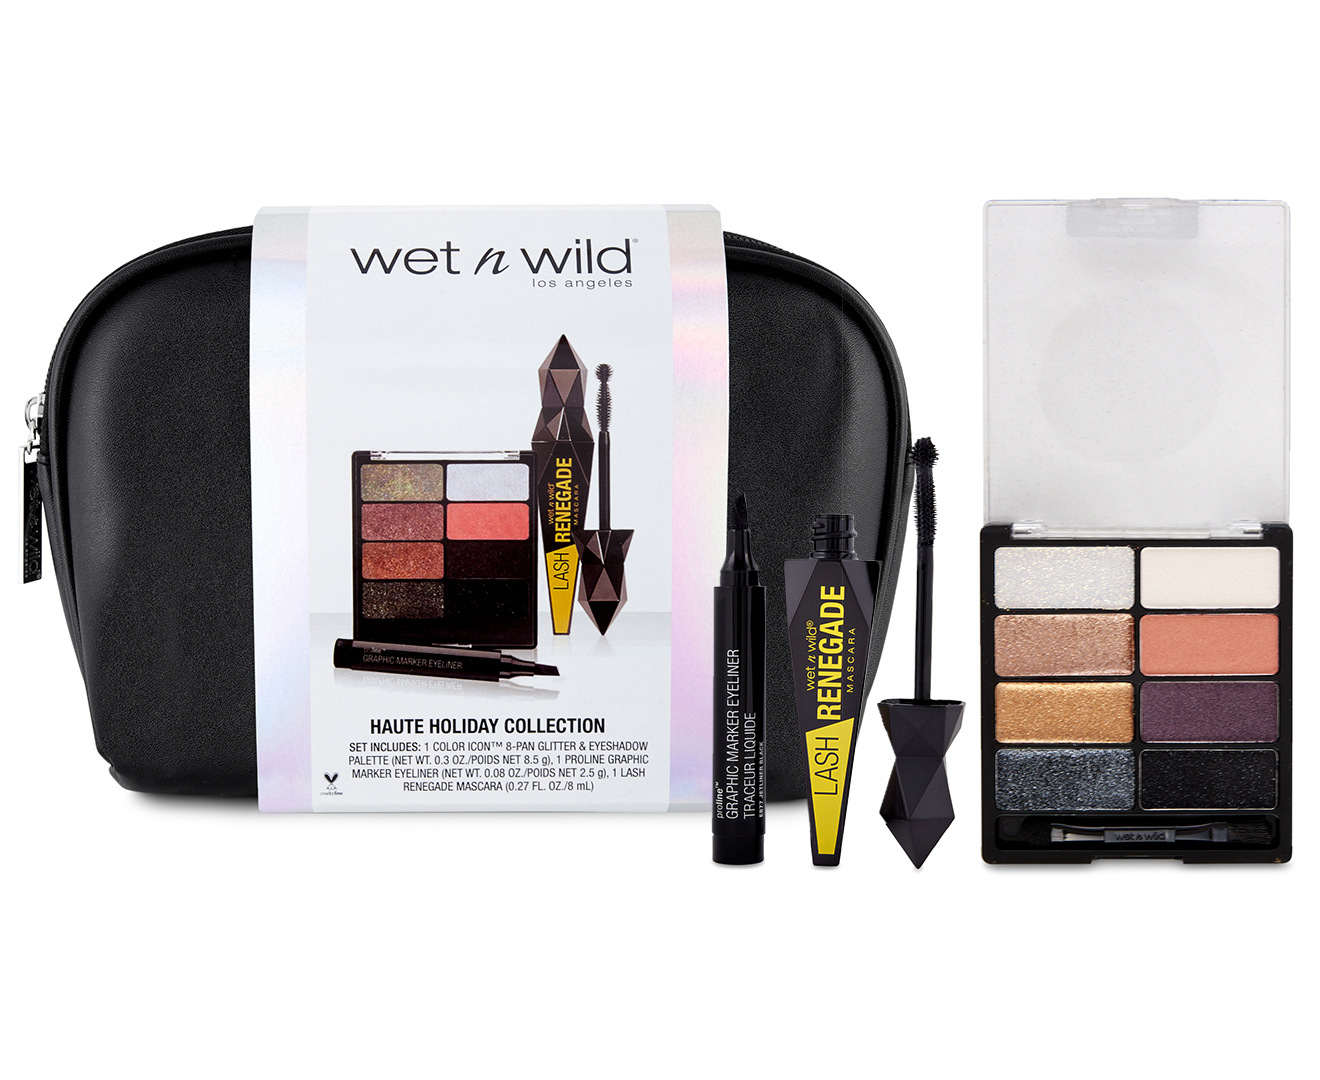 Wet n Wild Haute Holiday Collection Set Catch.co.nz